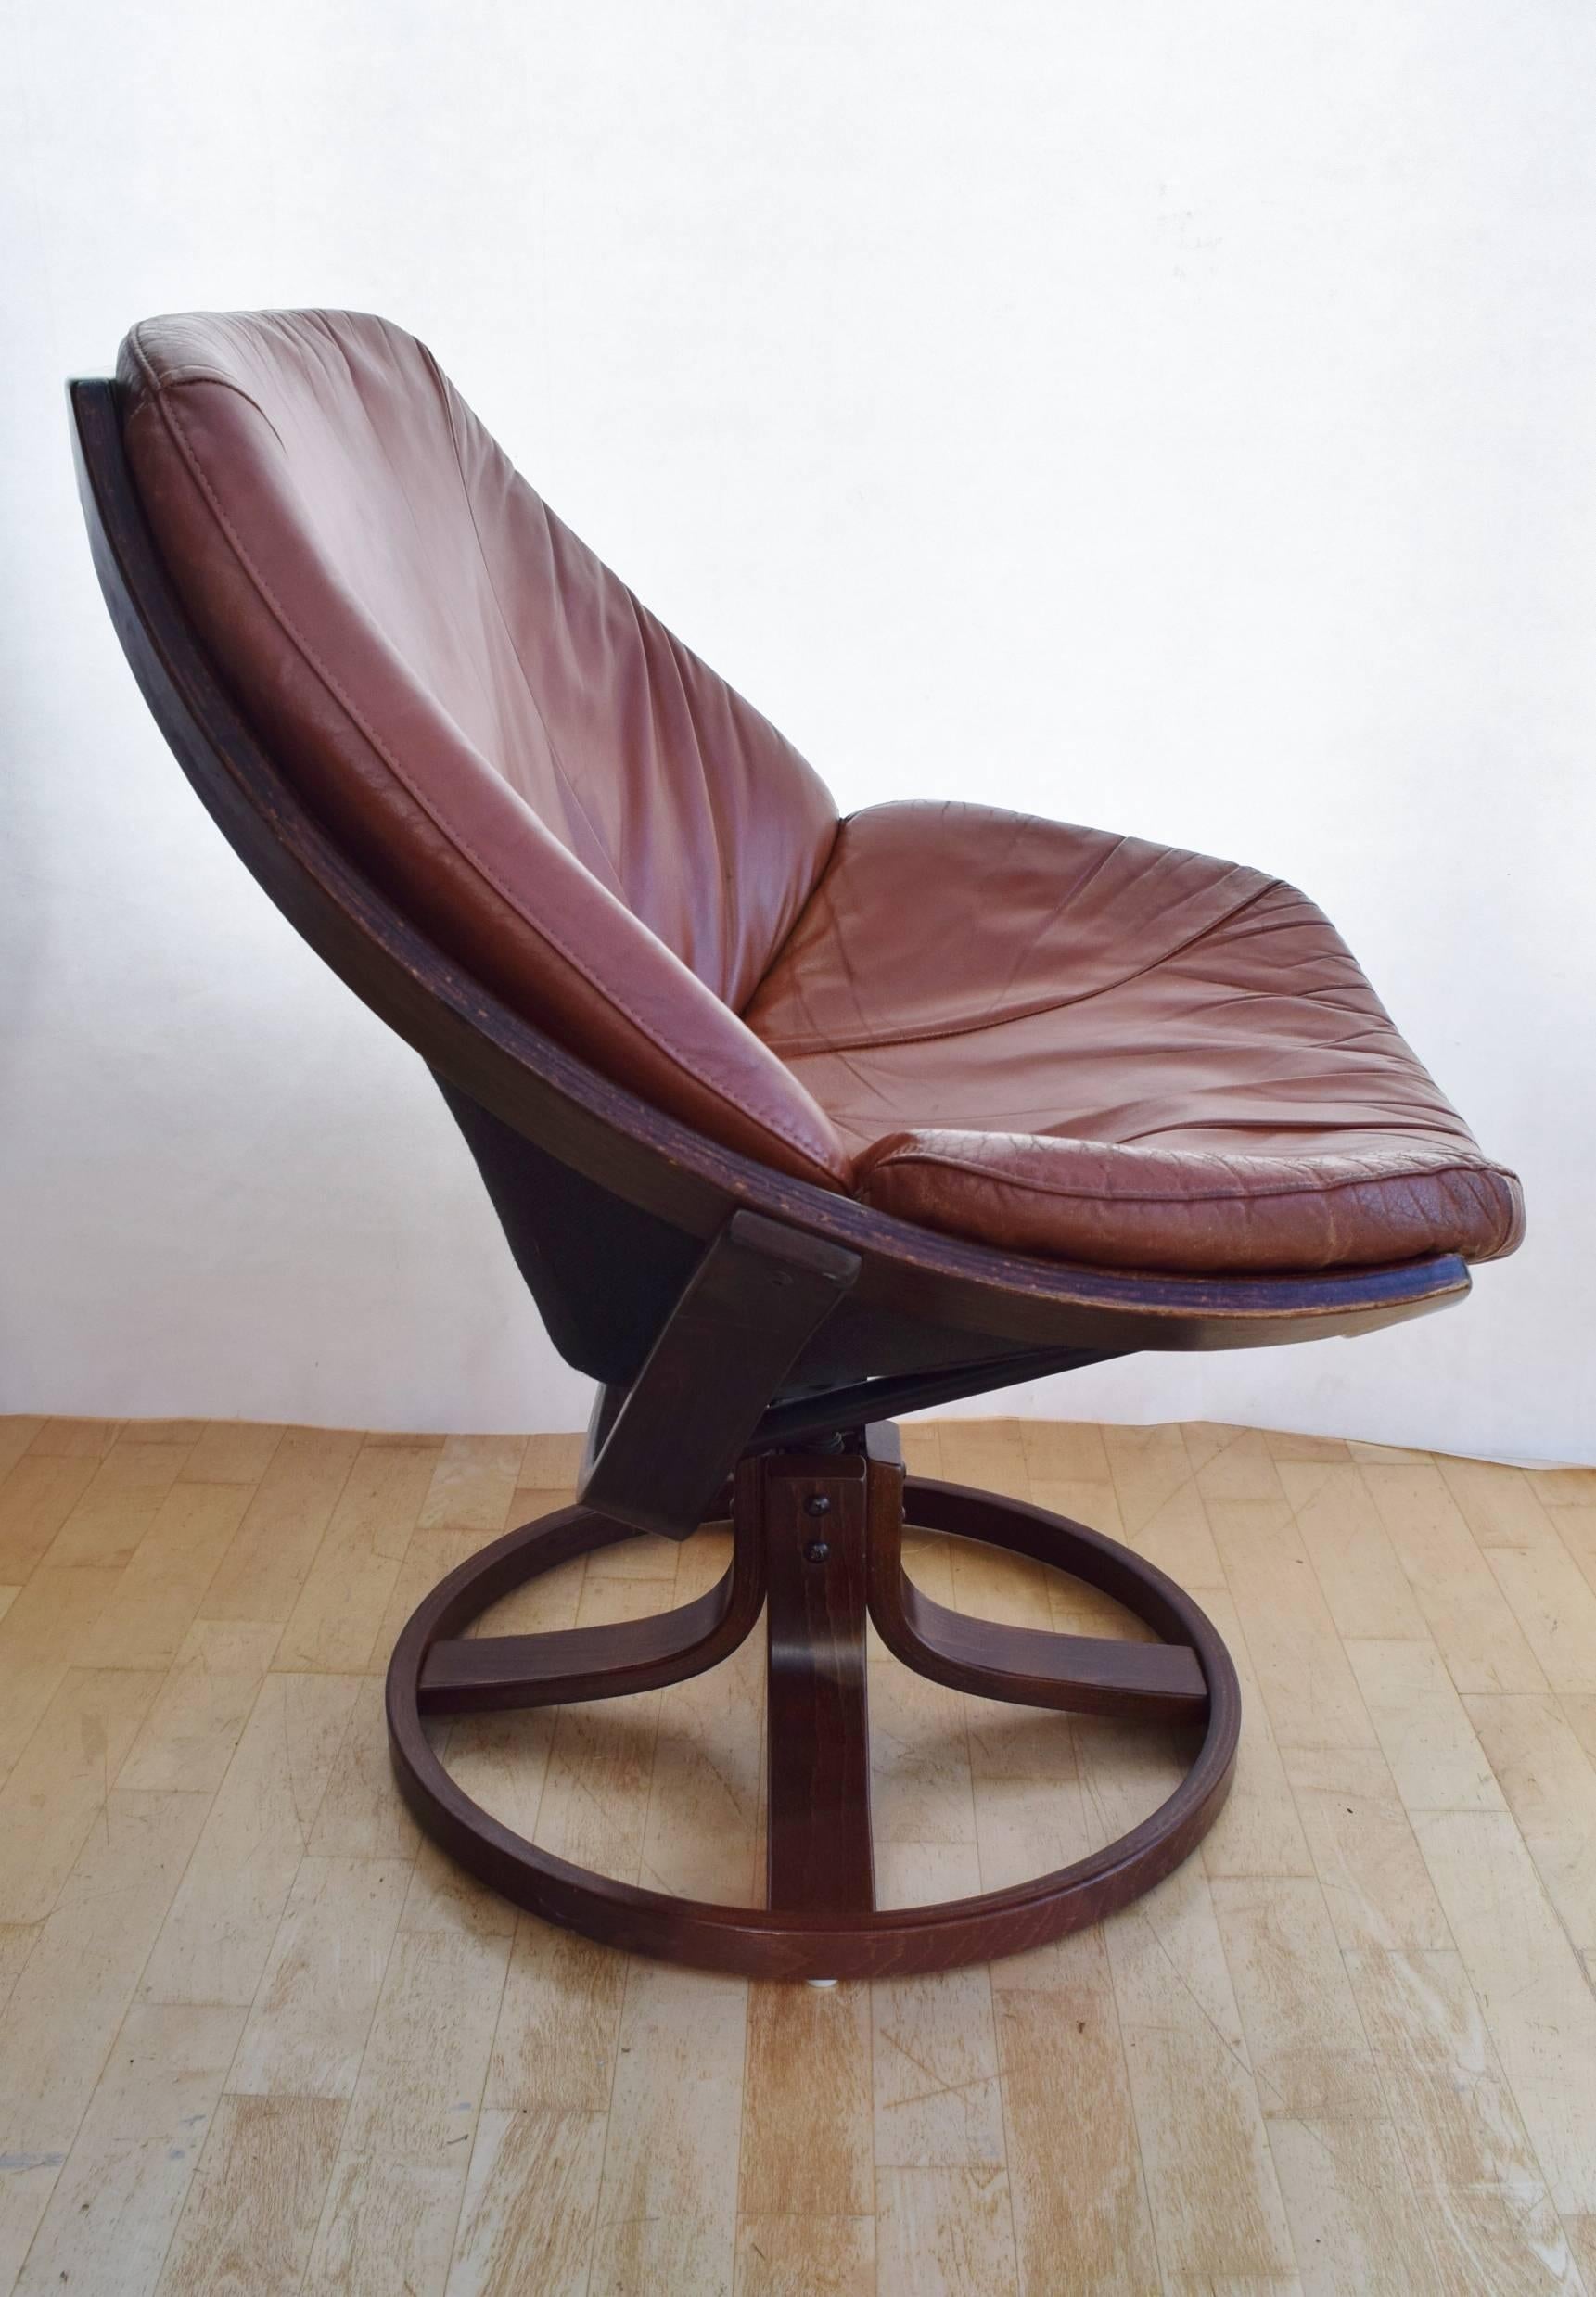 Mid-Century Modern Mid-Century Danish Tan Leather Egg or Shell Swivel Armchair, 1960s-1970s For Sale